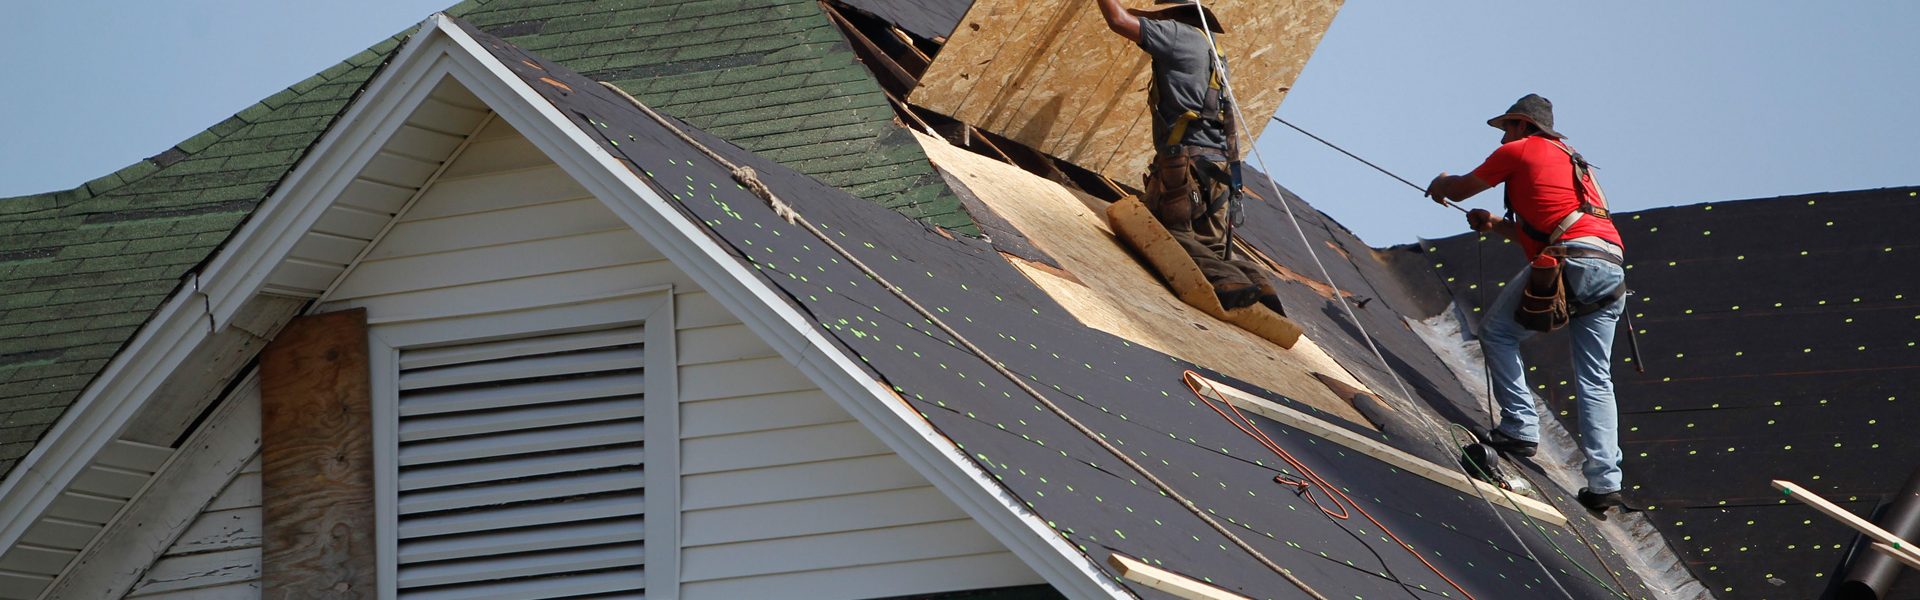 How to Properly Maintain Your Residential Roofing